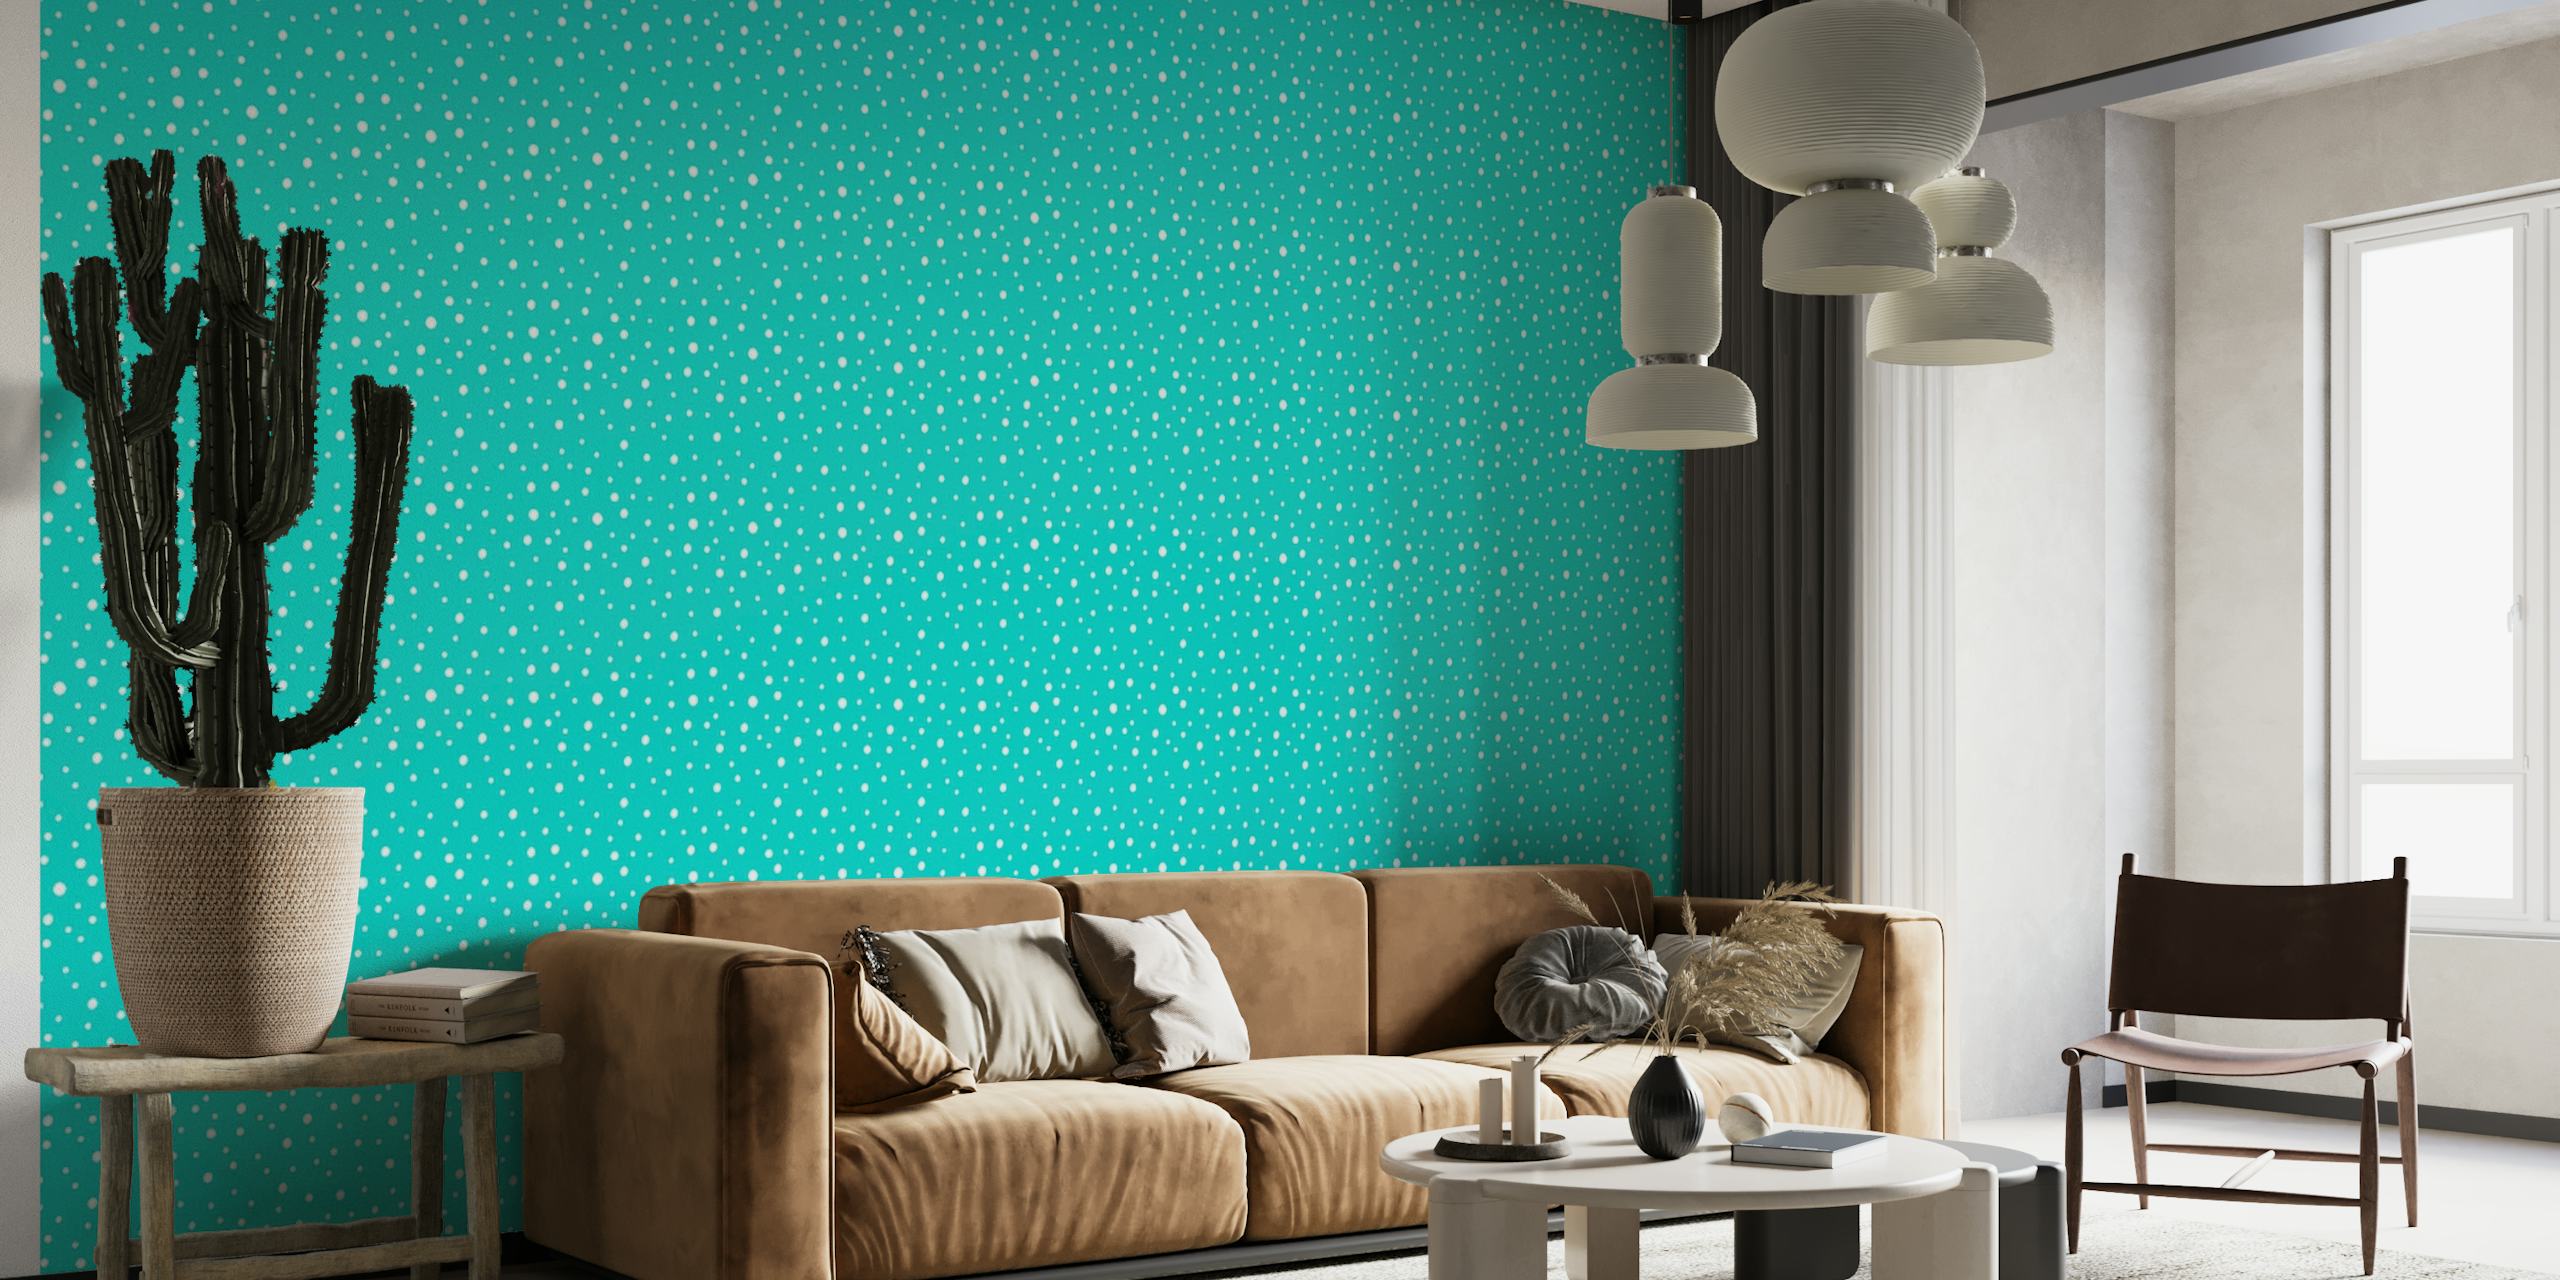 White Dots on Turquoise behang